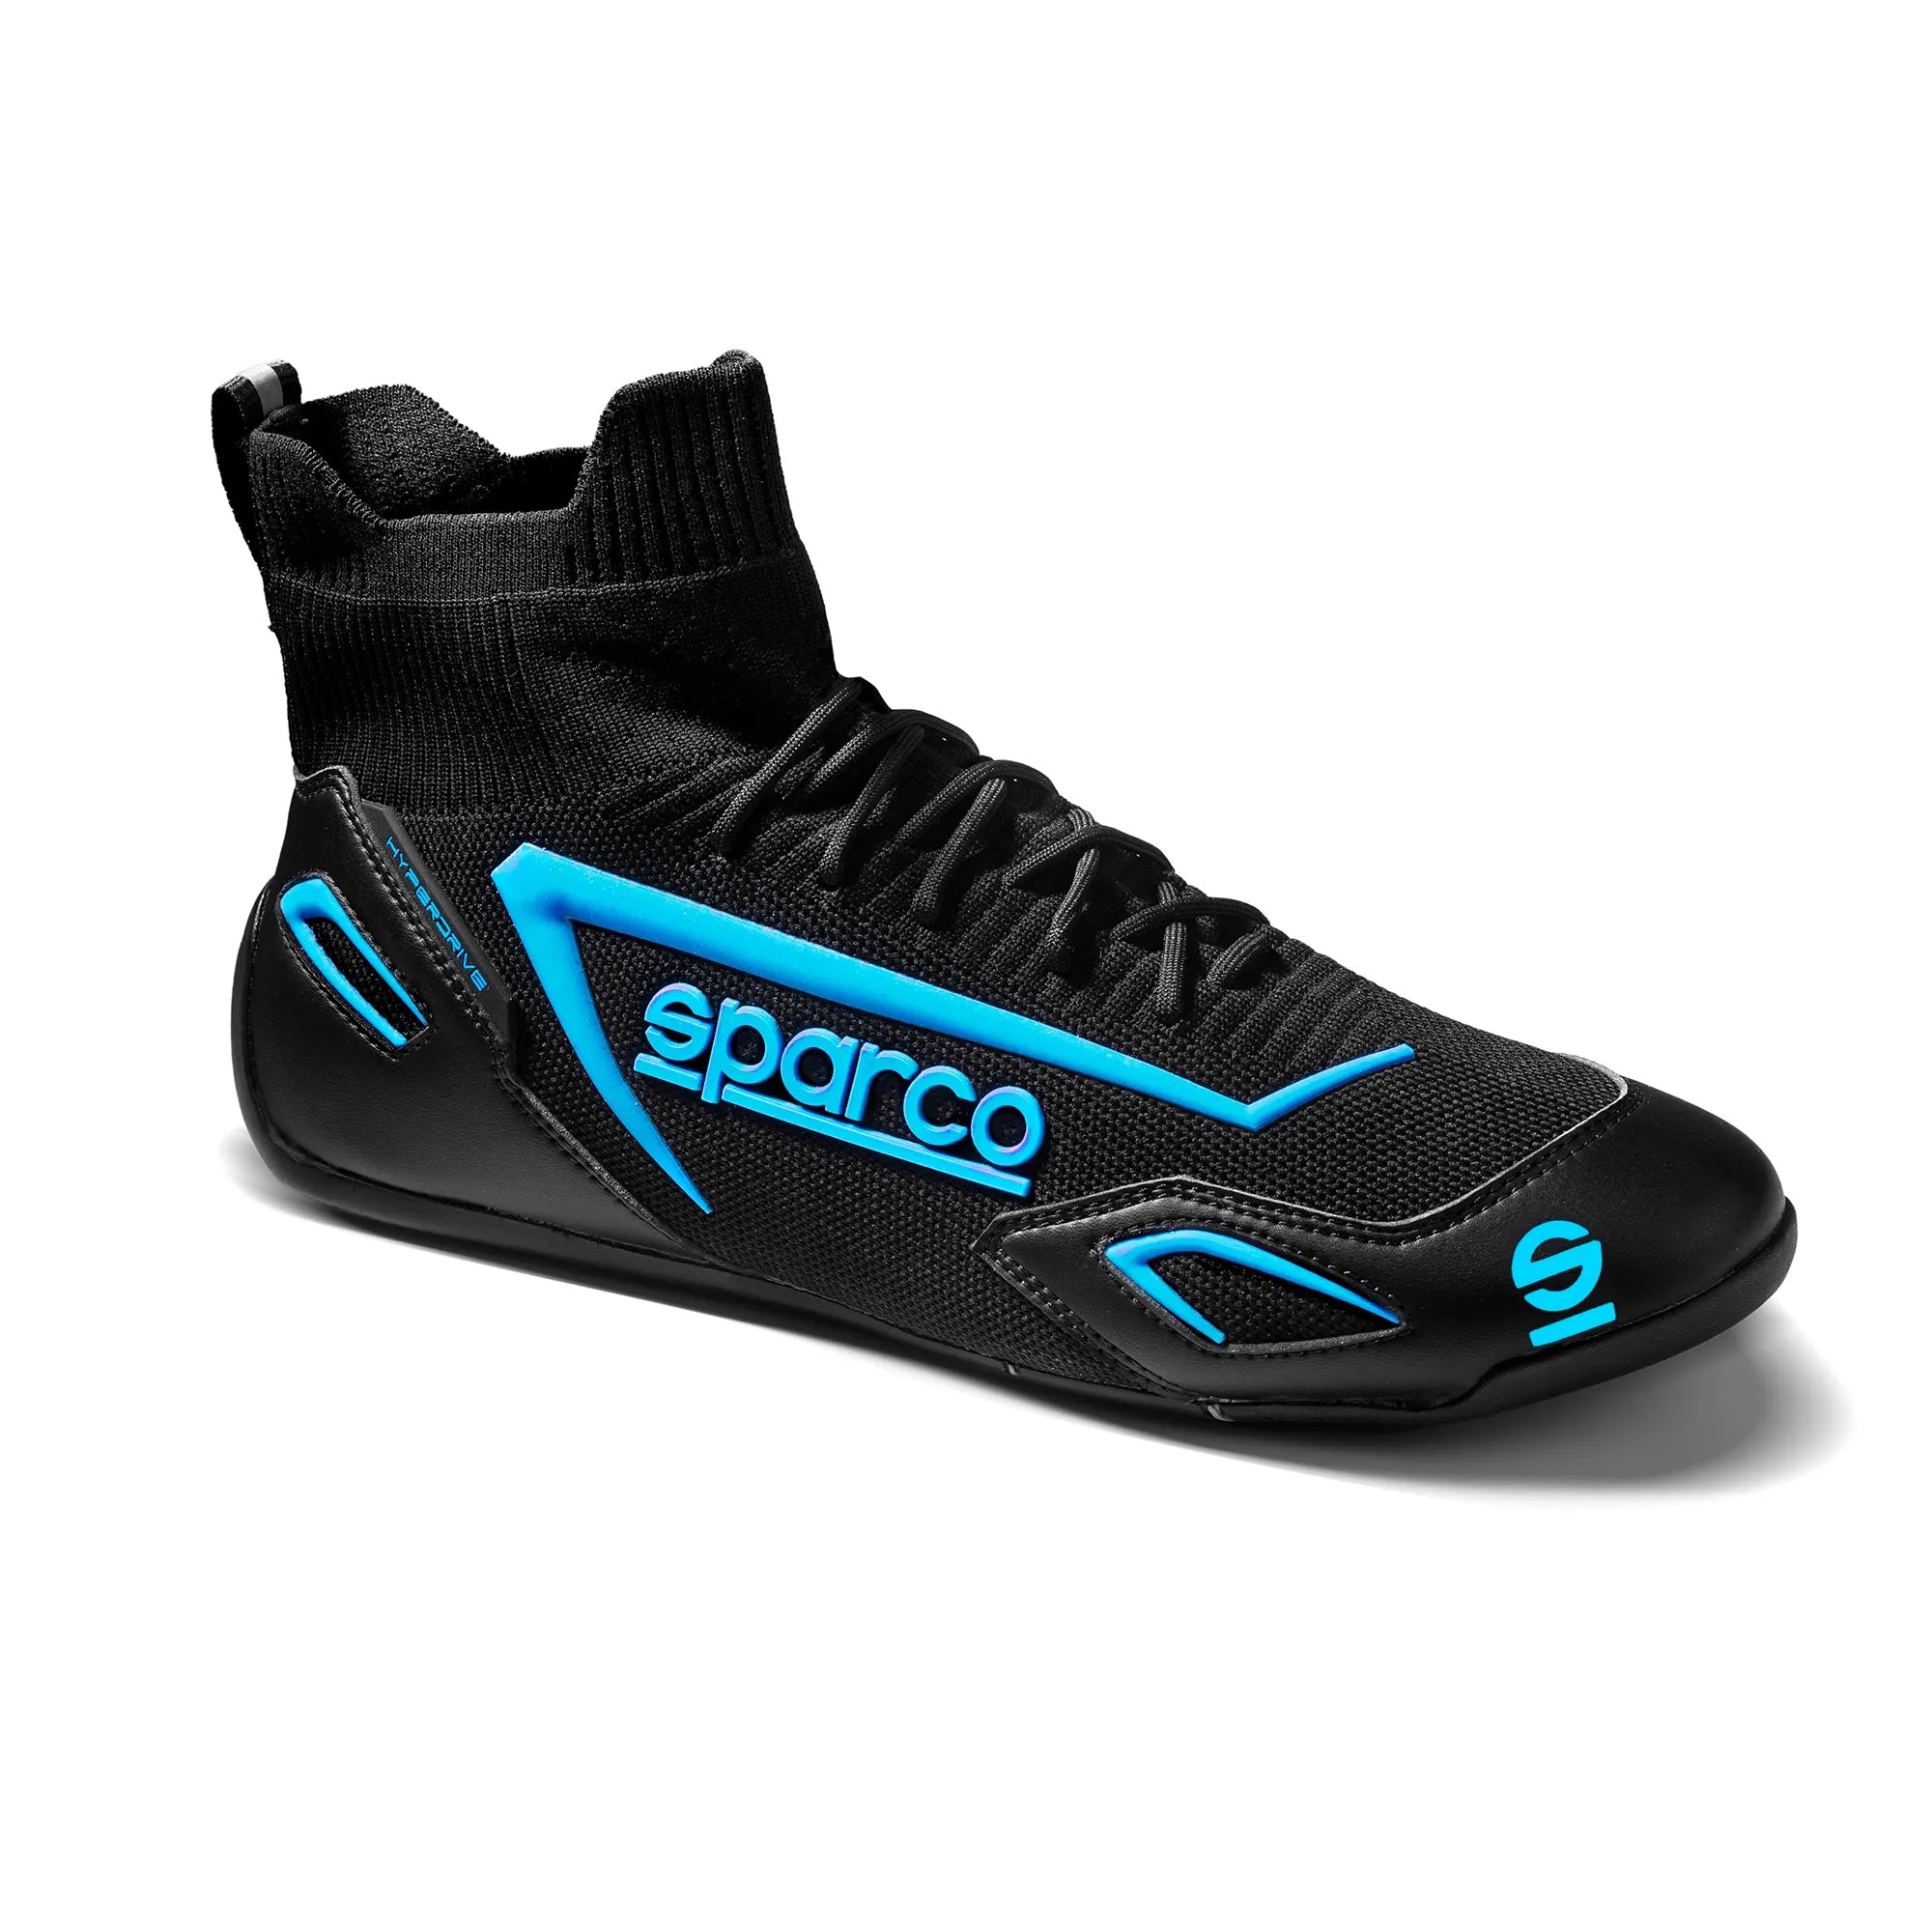 SPARCO 00129341NRAZ Gaming sim racing shoes HYPERDRIVE, black/blue, size 41 Photo-1 